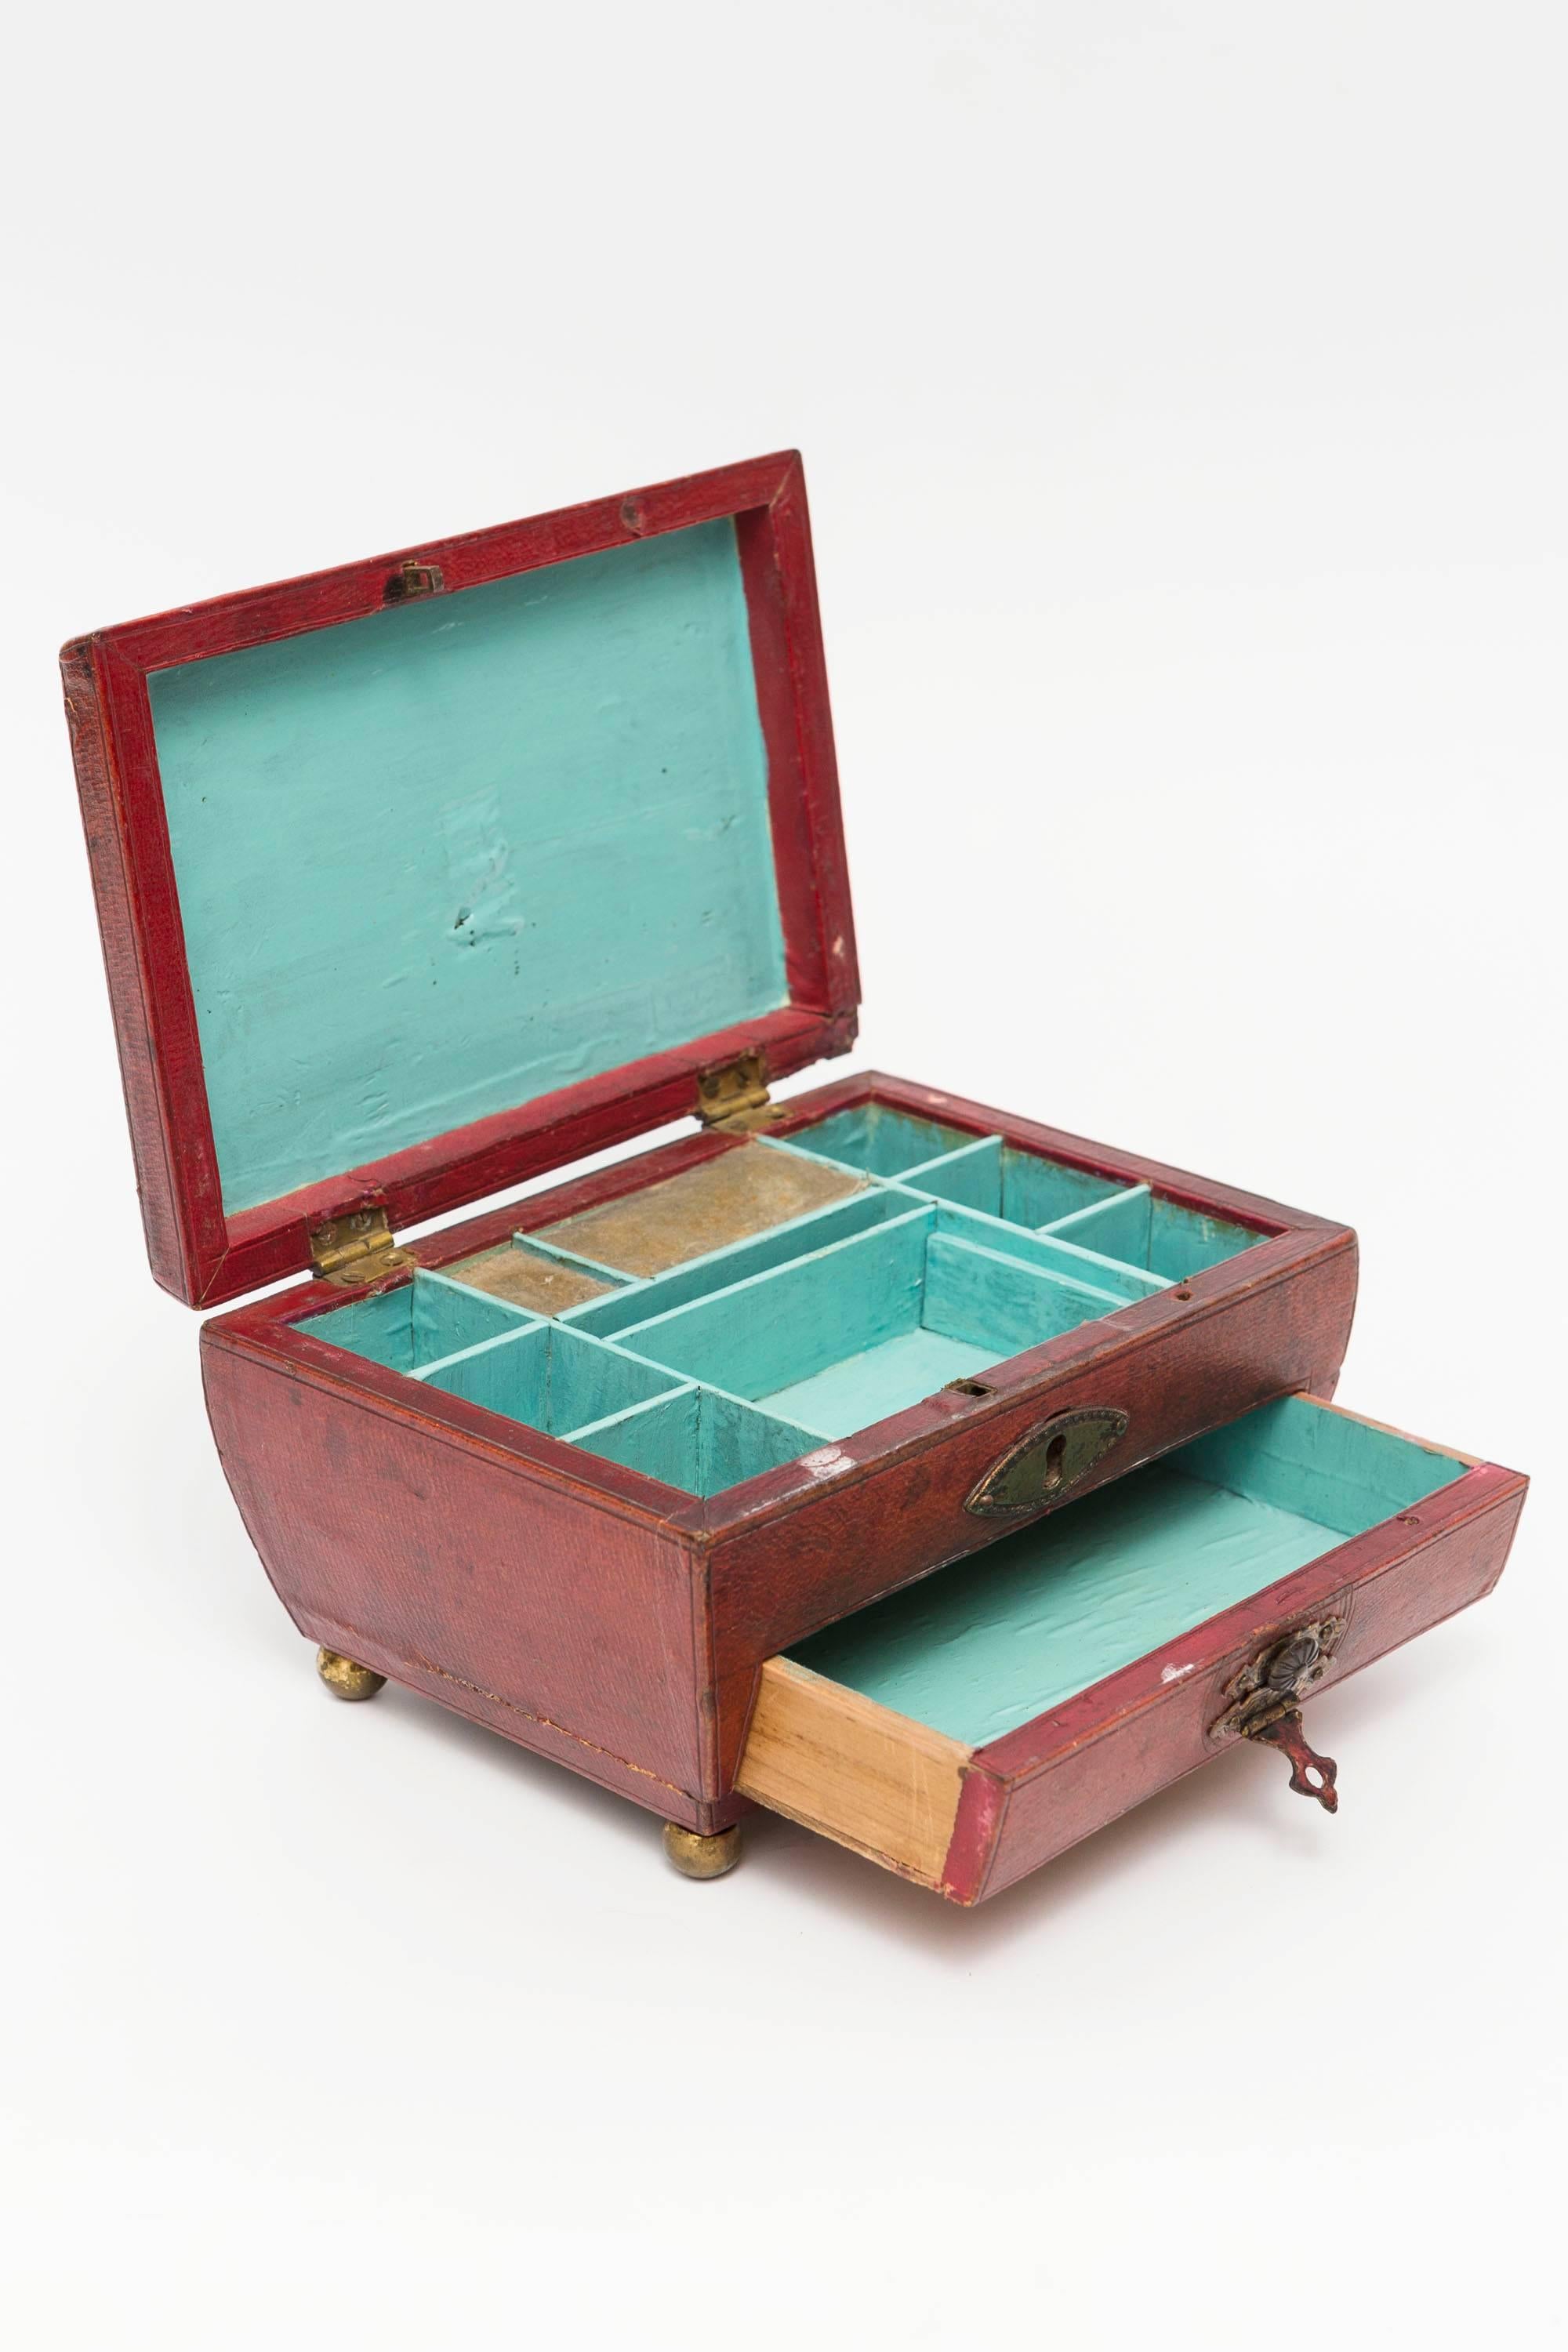 This is a 19th Century Moroccan red leather Georgian jewelry casket or box.  The top lid opens to reveal divided sections painted in a turquoise color. There is a small bottom drawer that pulls out with storage of single tray. All the hardware is